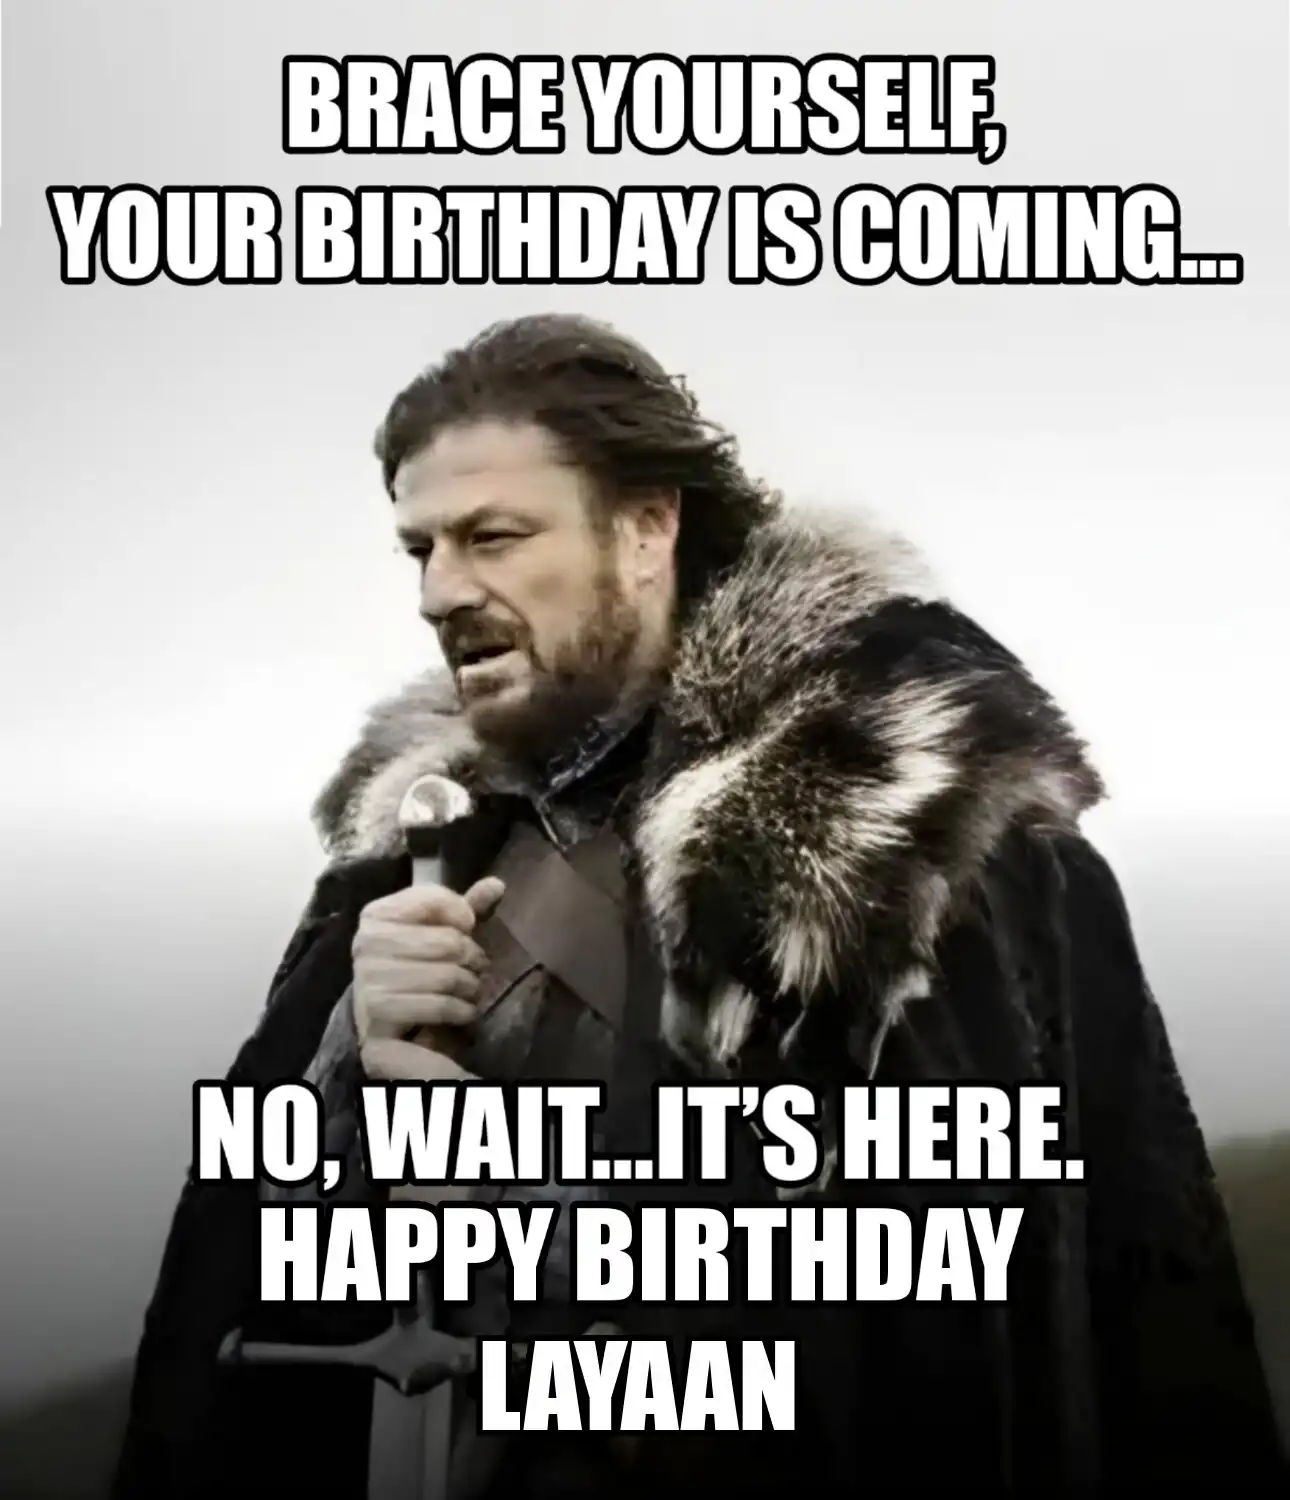 Happy Birthday Layaan Brace Yourself Your Birthday Is Coming Meme